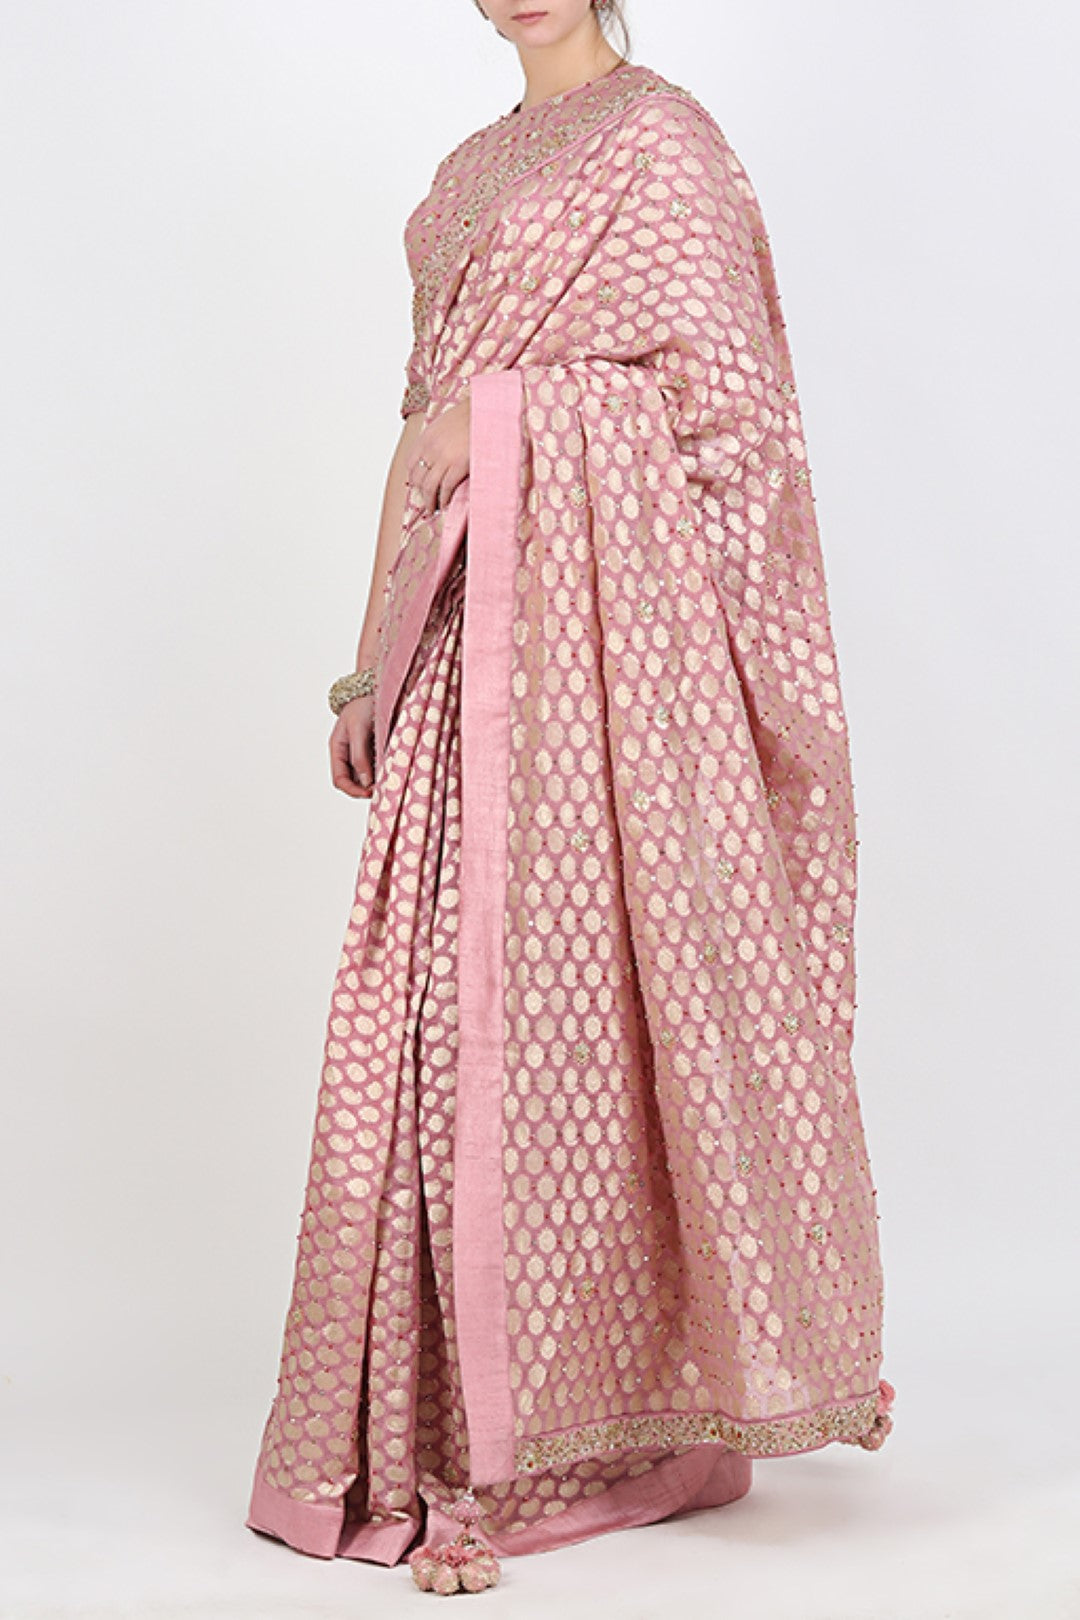 LAVENDER BROCADE EMBROIDERED SARI WITH EMBROIDERED BLOUSE.